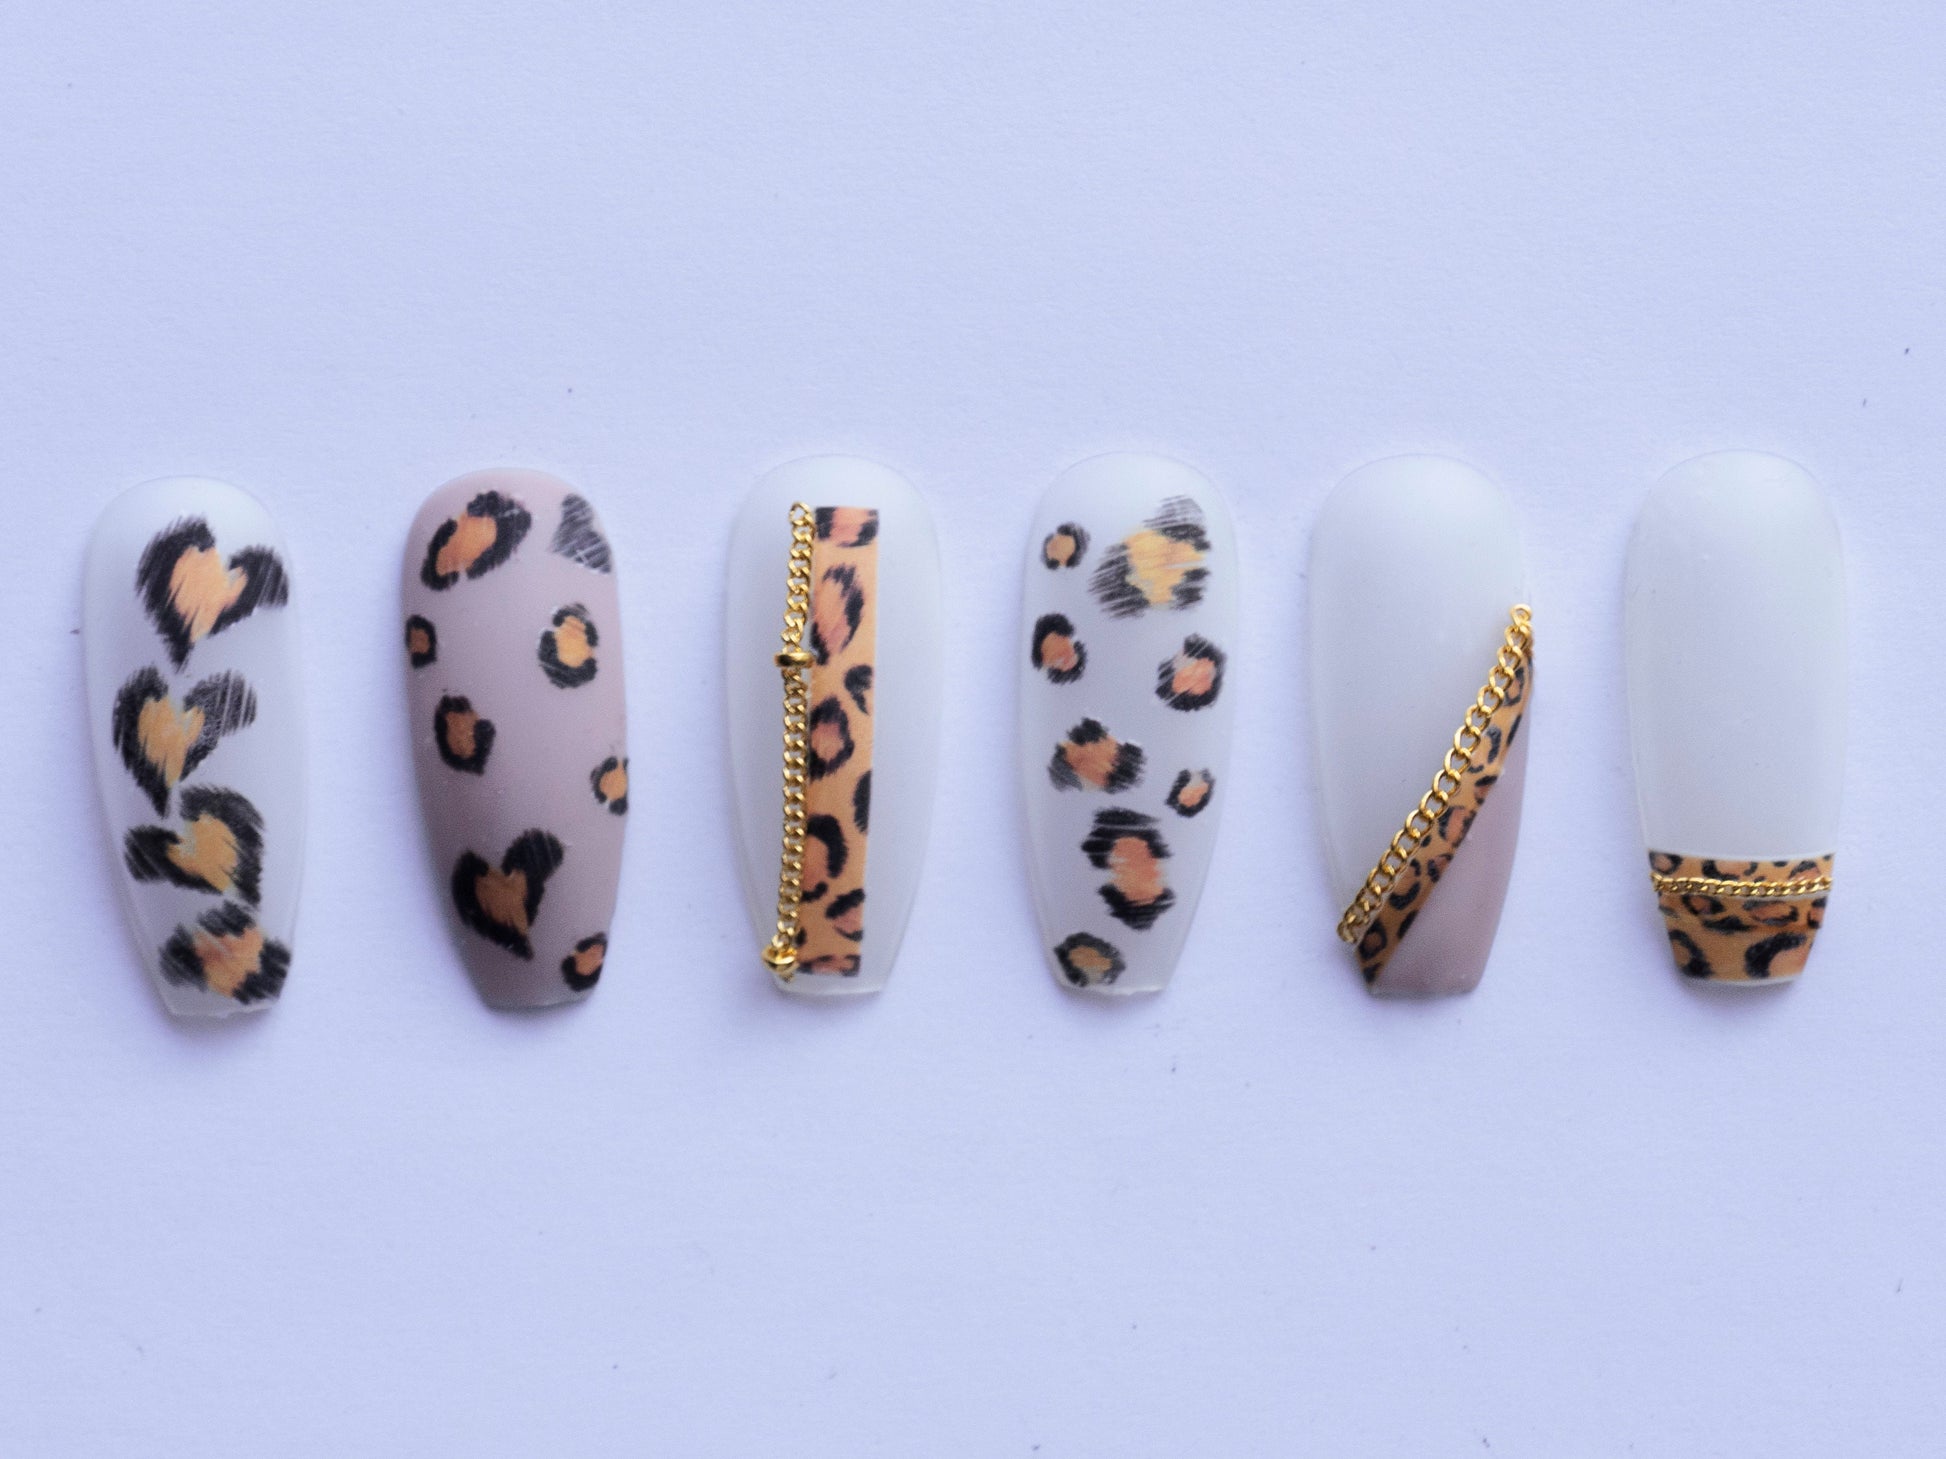 Leopard Print Nail Sticker/ Animal Pattern Self Adhesive Decals/ Brown Heart Cute Peel Off Nail Deco